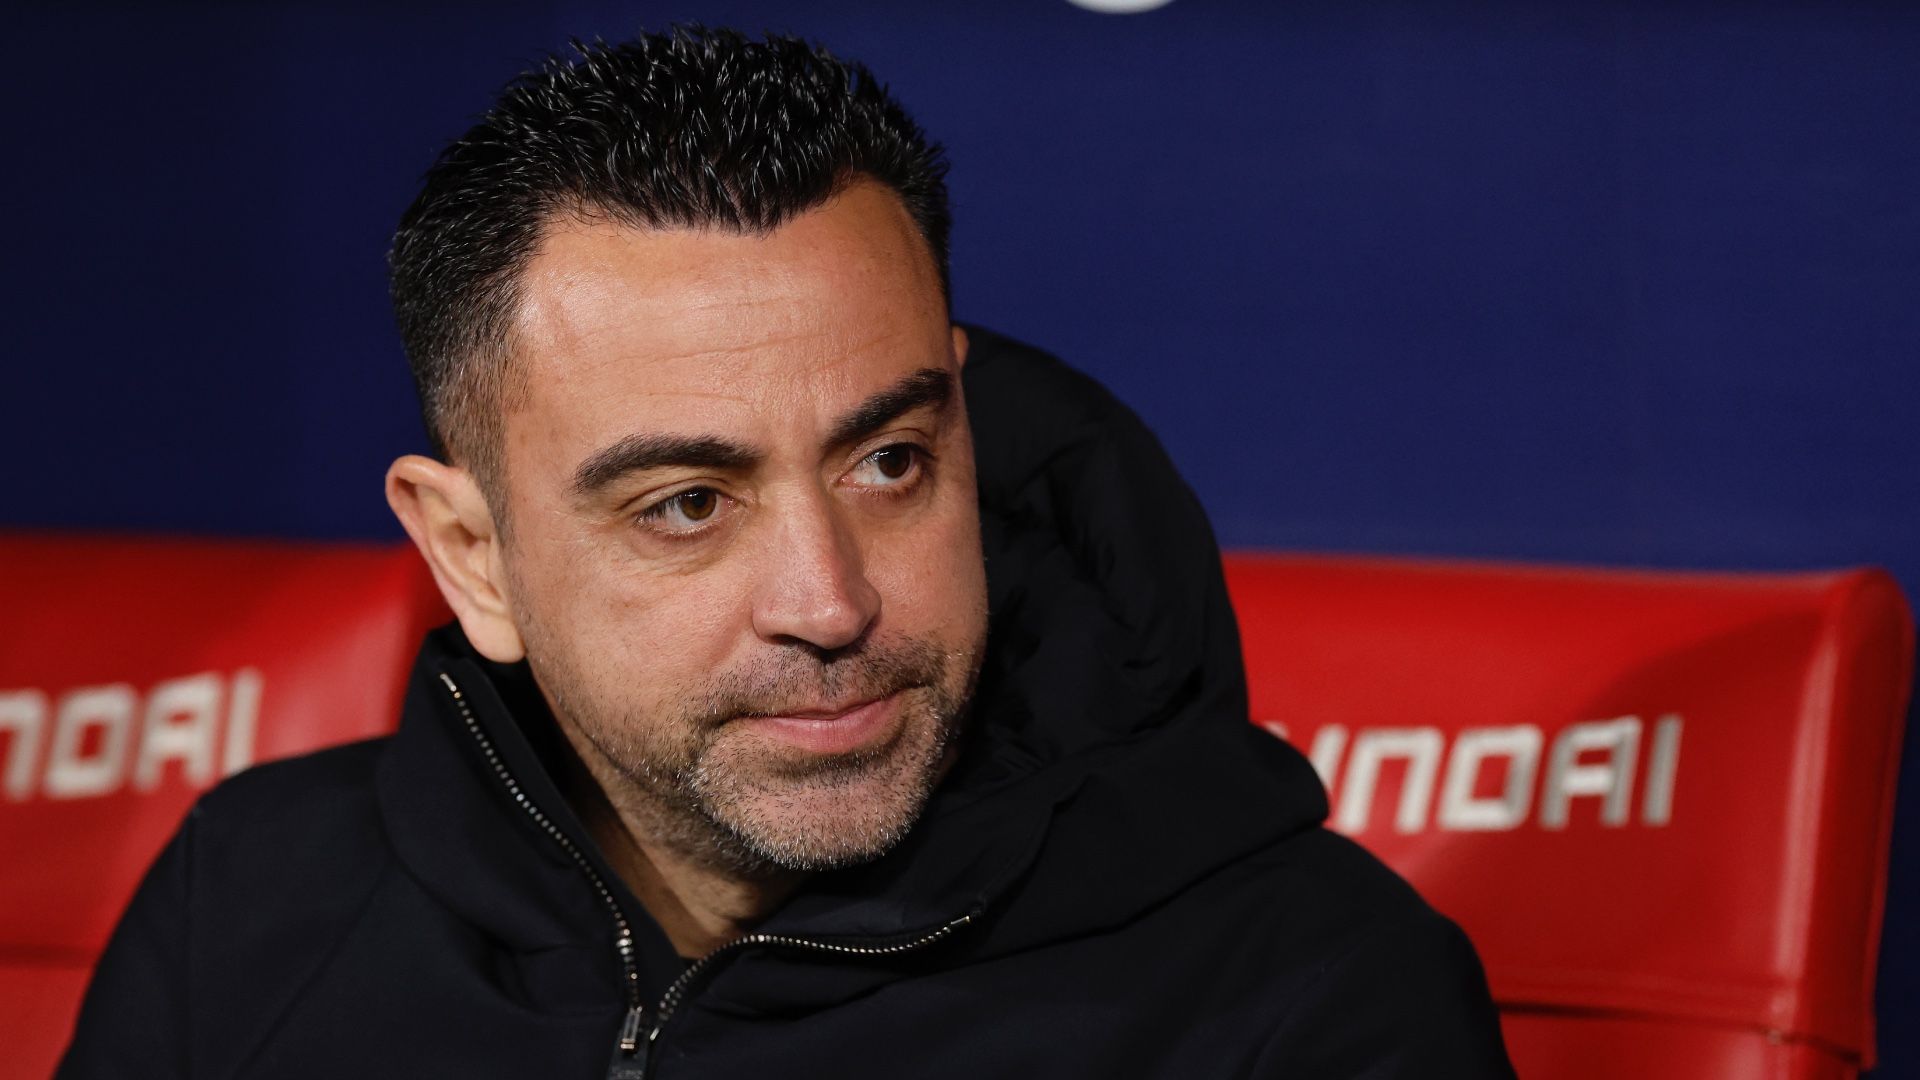 'tasted bad to me' - xavi opens up on ousmane dembele's exit from barcelona ahead of champions league clash with psg